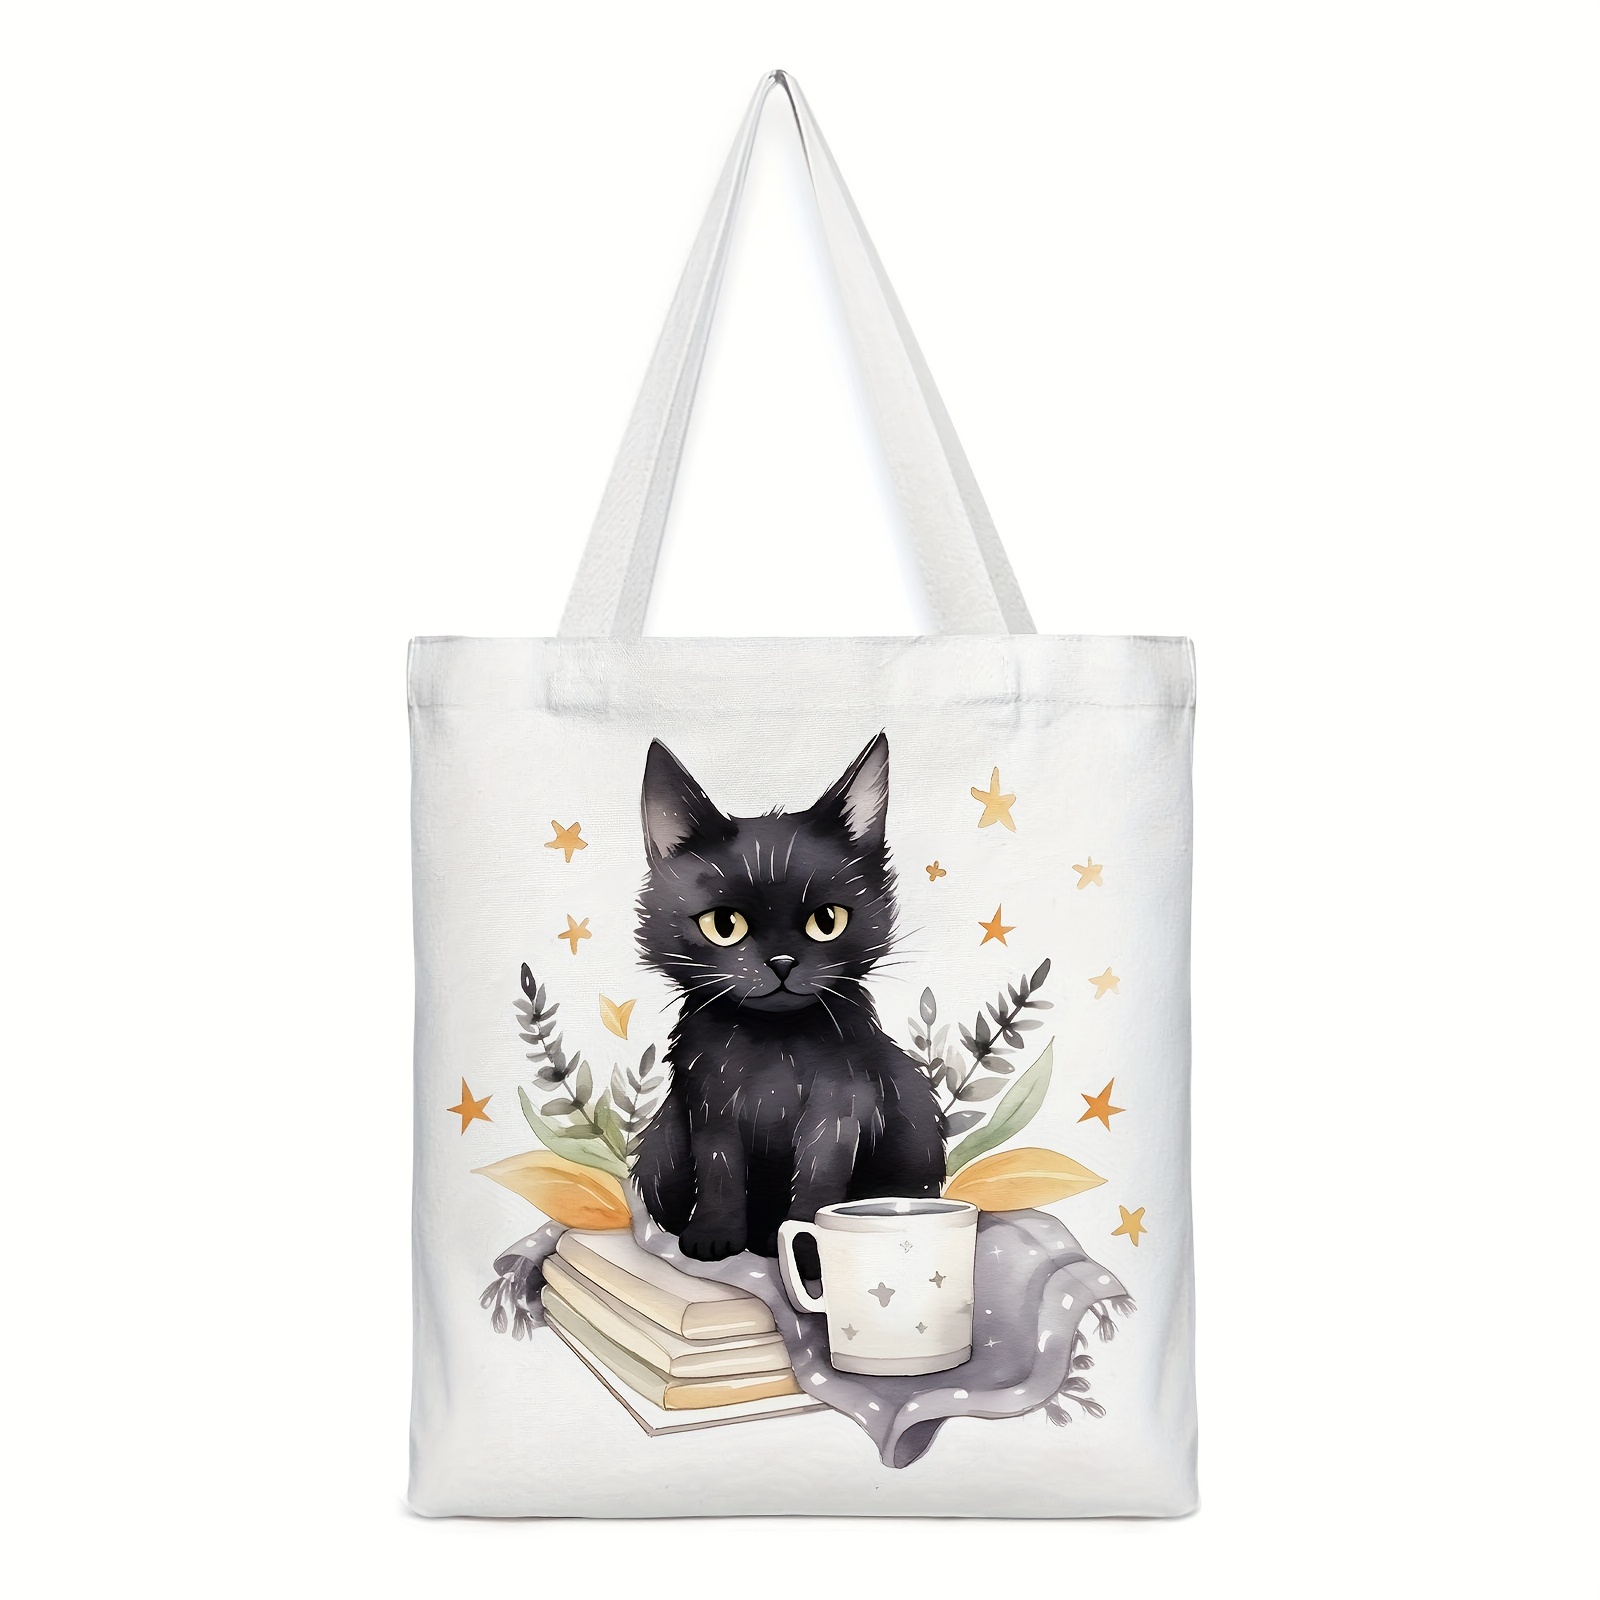 ZJEOQOQ Cute Colorful Cat Tote Bag